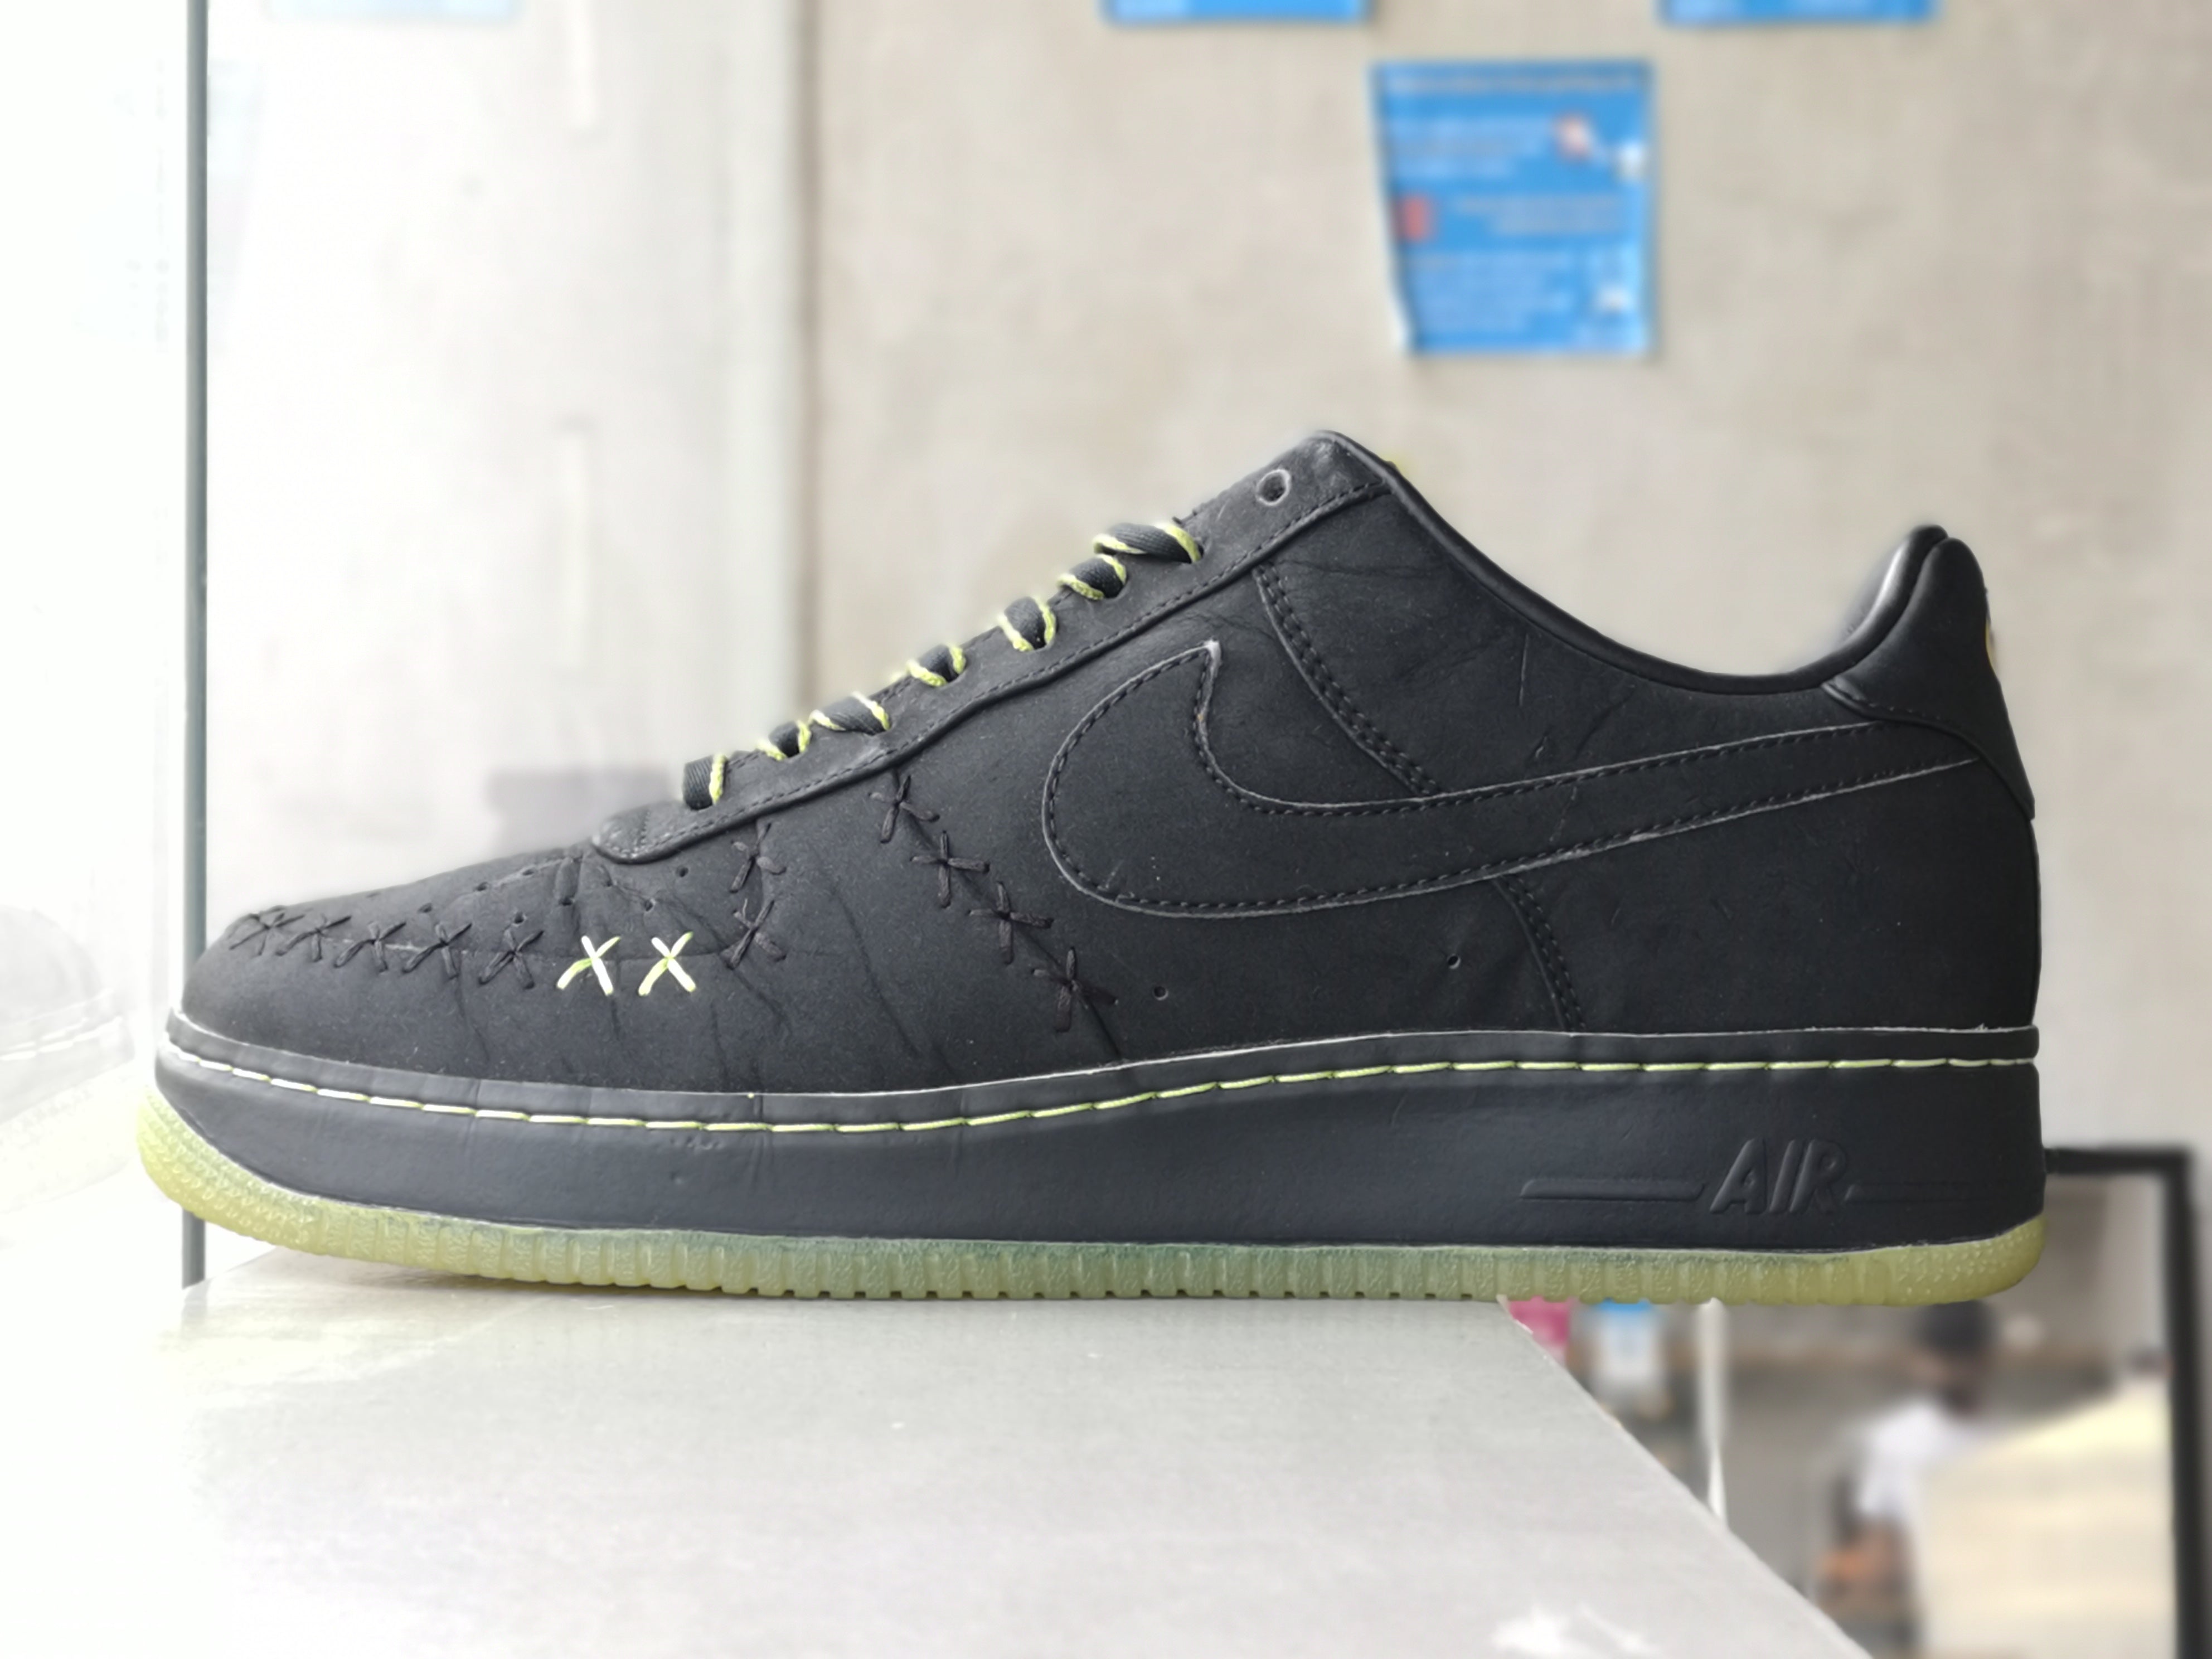 Nike Air Force One Low One World x Kaws 